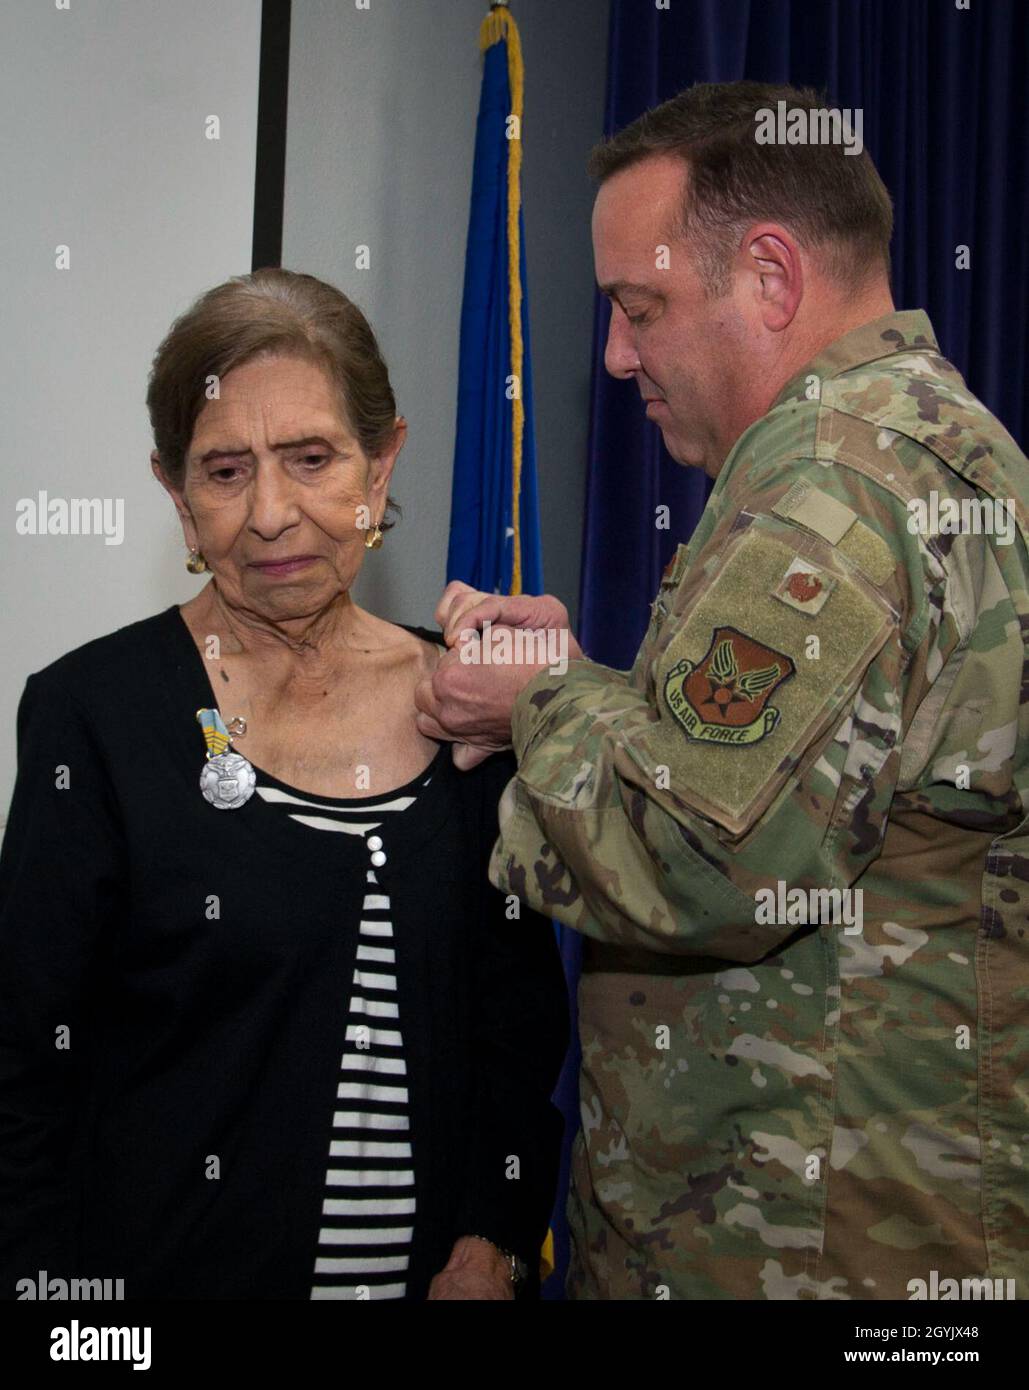 Mary O. Price is presented with a pin for the Award for Meritorious Civilian Service from Col. Robert Hoskins, director of personnel support, Air Force’s Personnel Center, Jan. 10, 2020 at Joint Base San Antonio-Randolph, Texas. Price retired after 52 years of dedicated service. Stock Photo